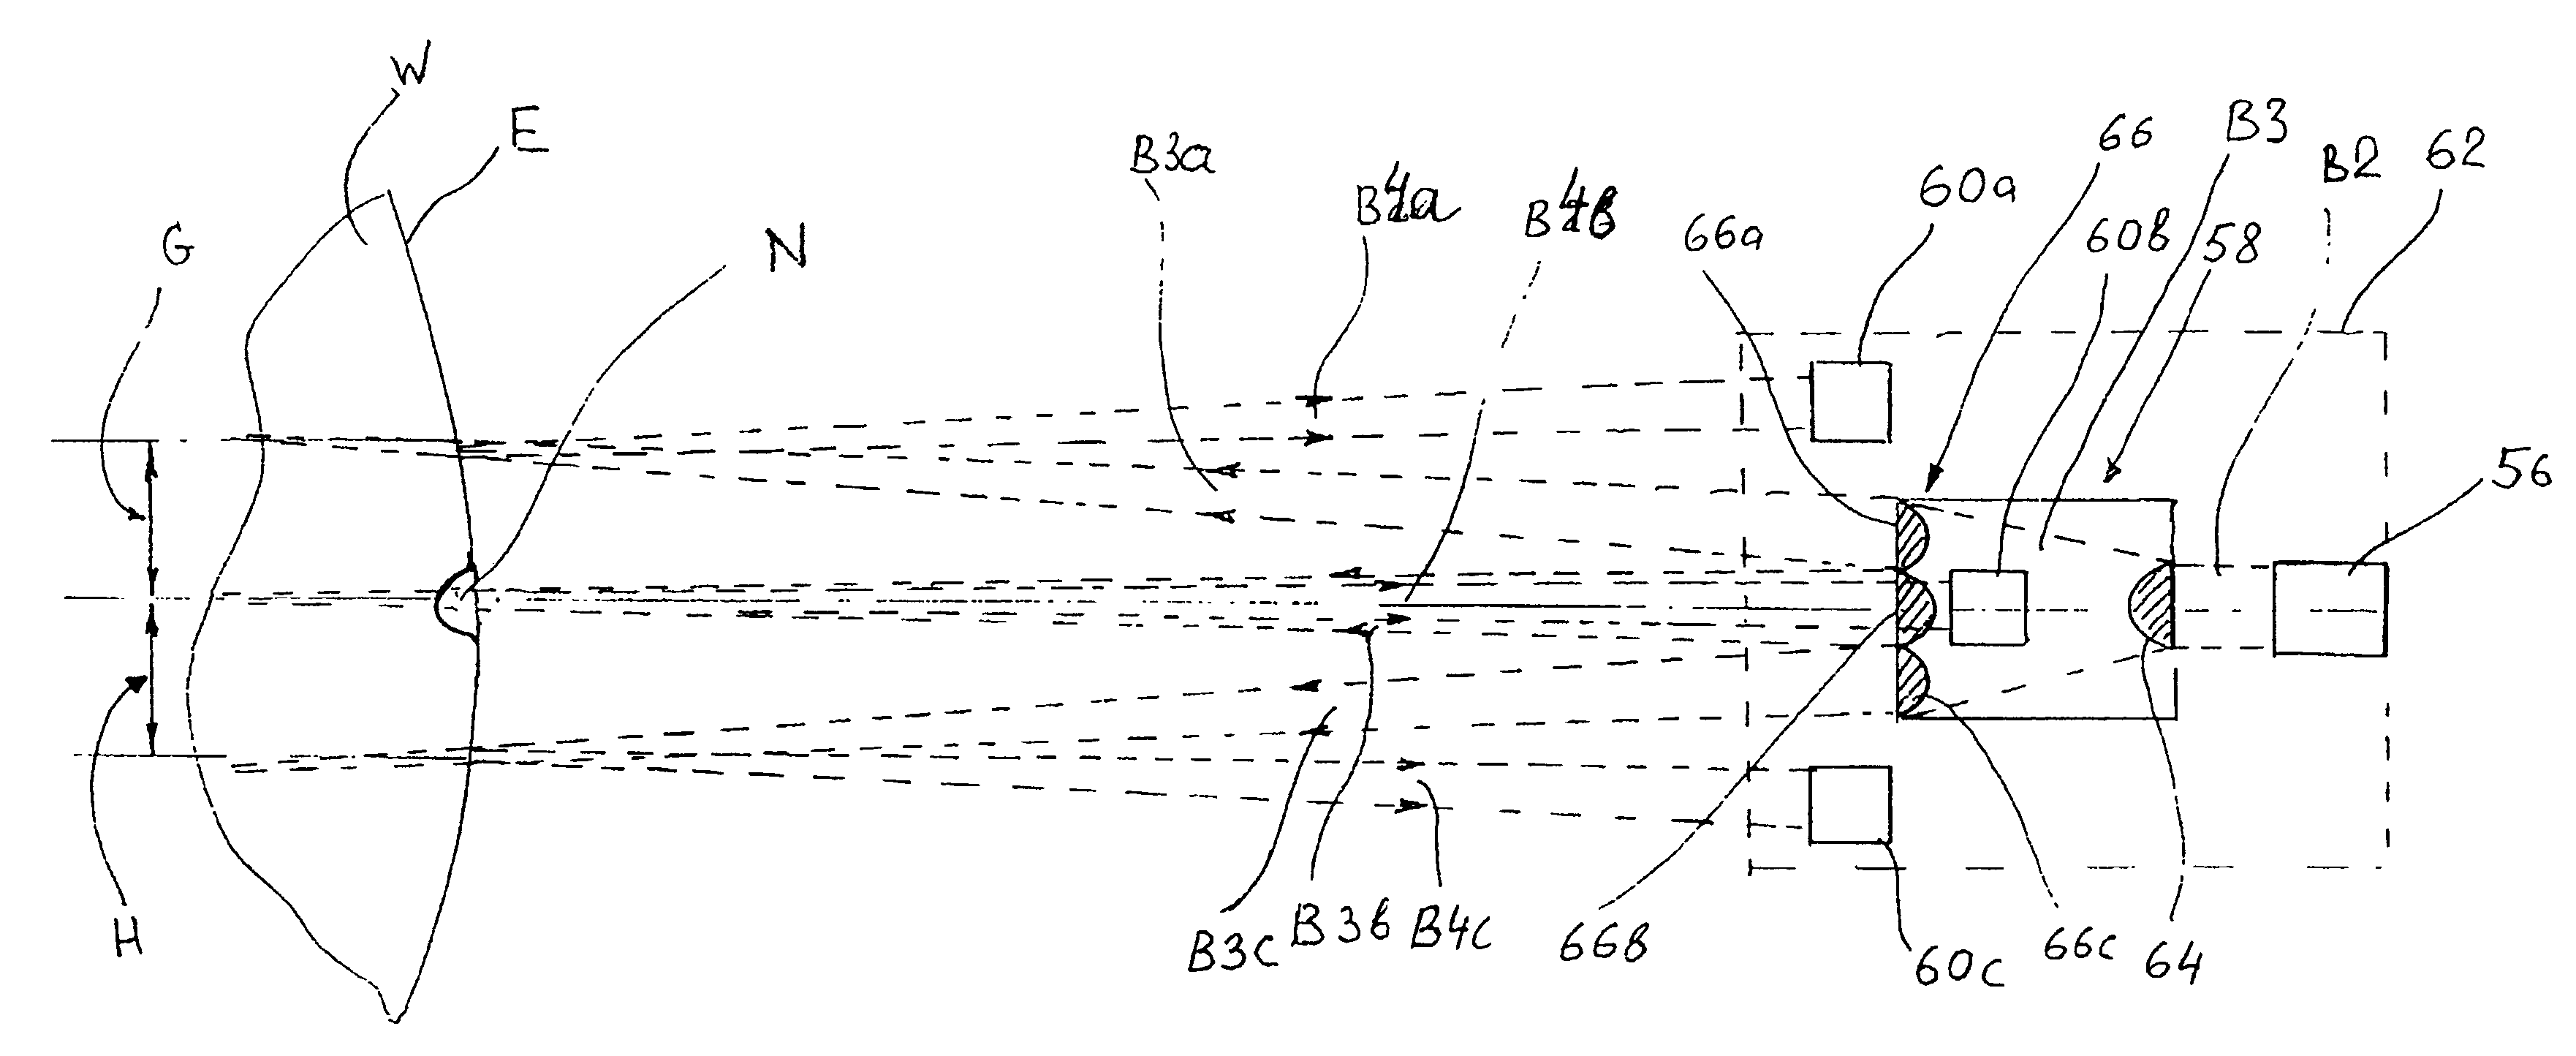 Mapping sensor system for detecting positions of flat objects